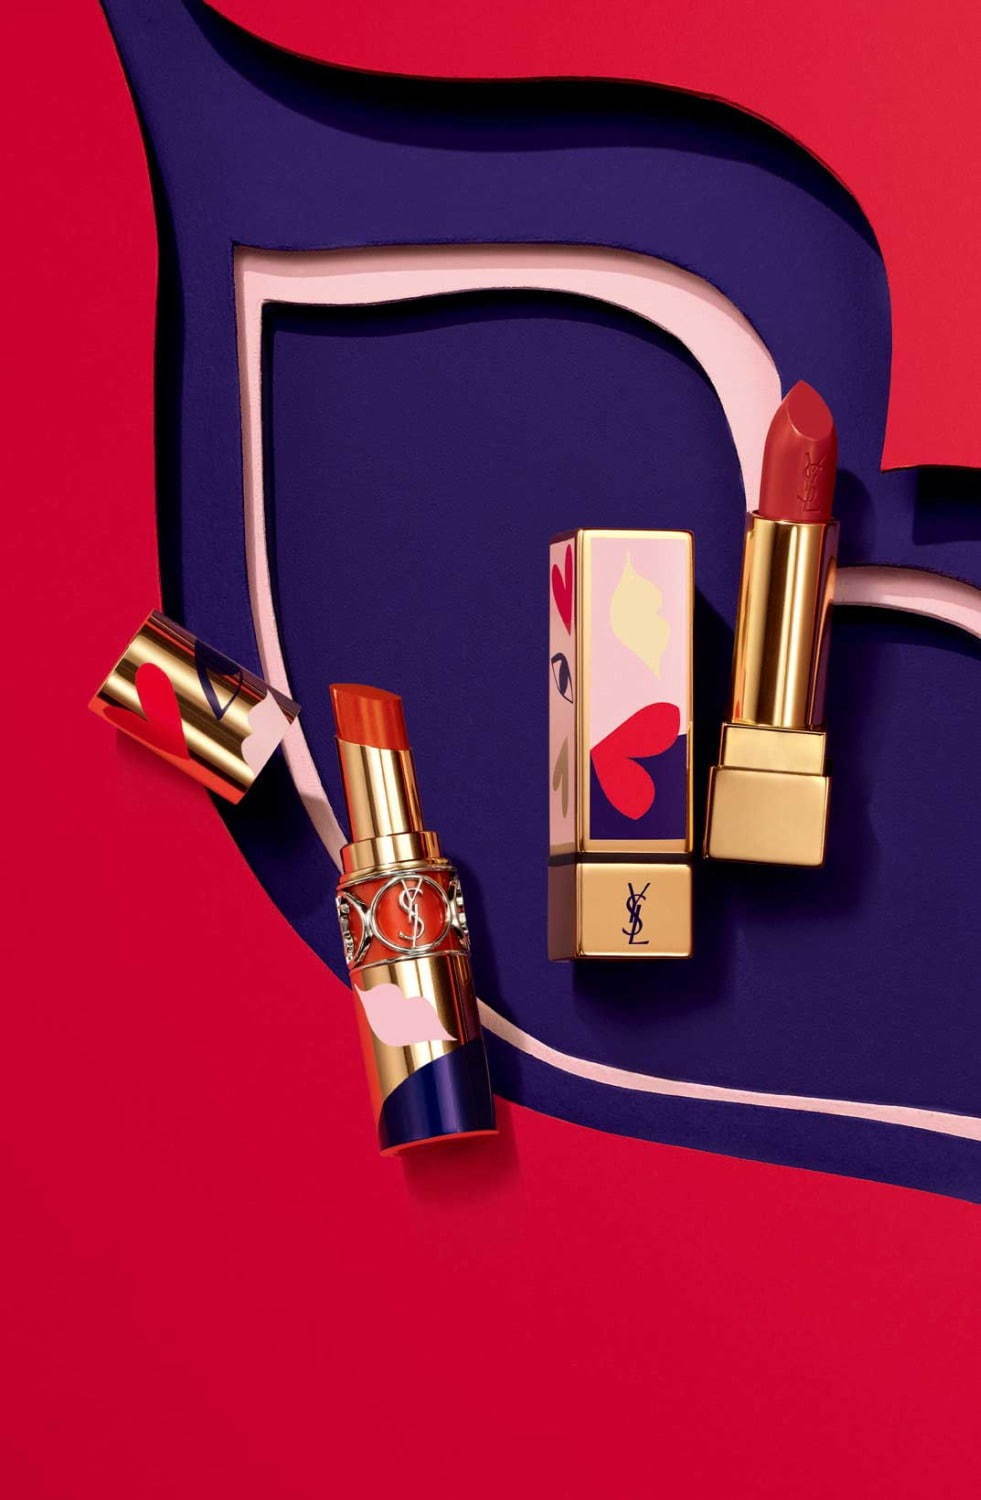 YSL I LOVE YOU SO POP SUMMER 2020 COLLECTION INSPIRED BY POP ART 3 - YSL I LOVE YOU SO POP SUMMER 2020 COLLECTION INSPIRED BY POP ART